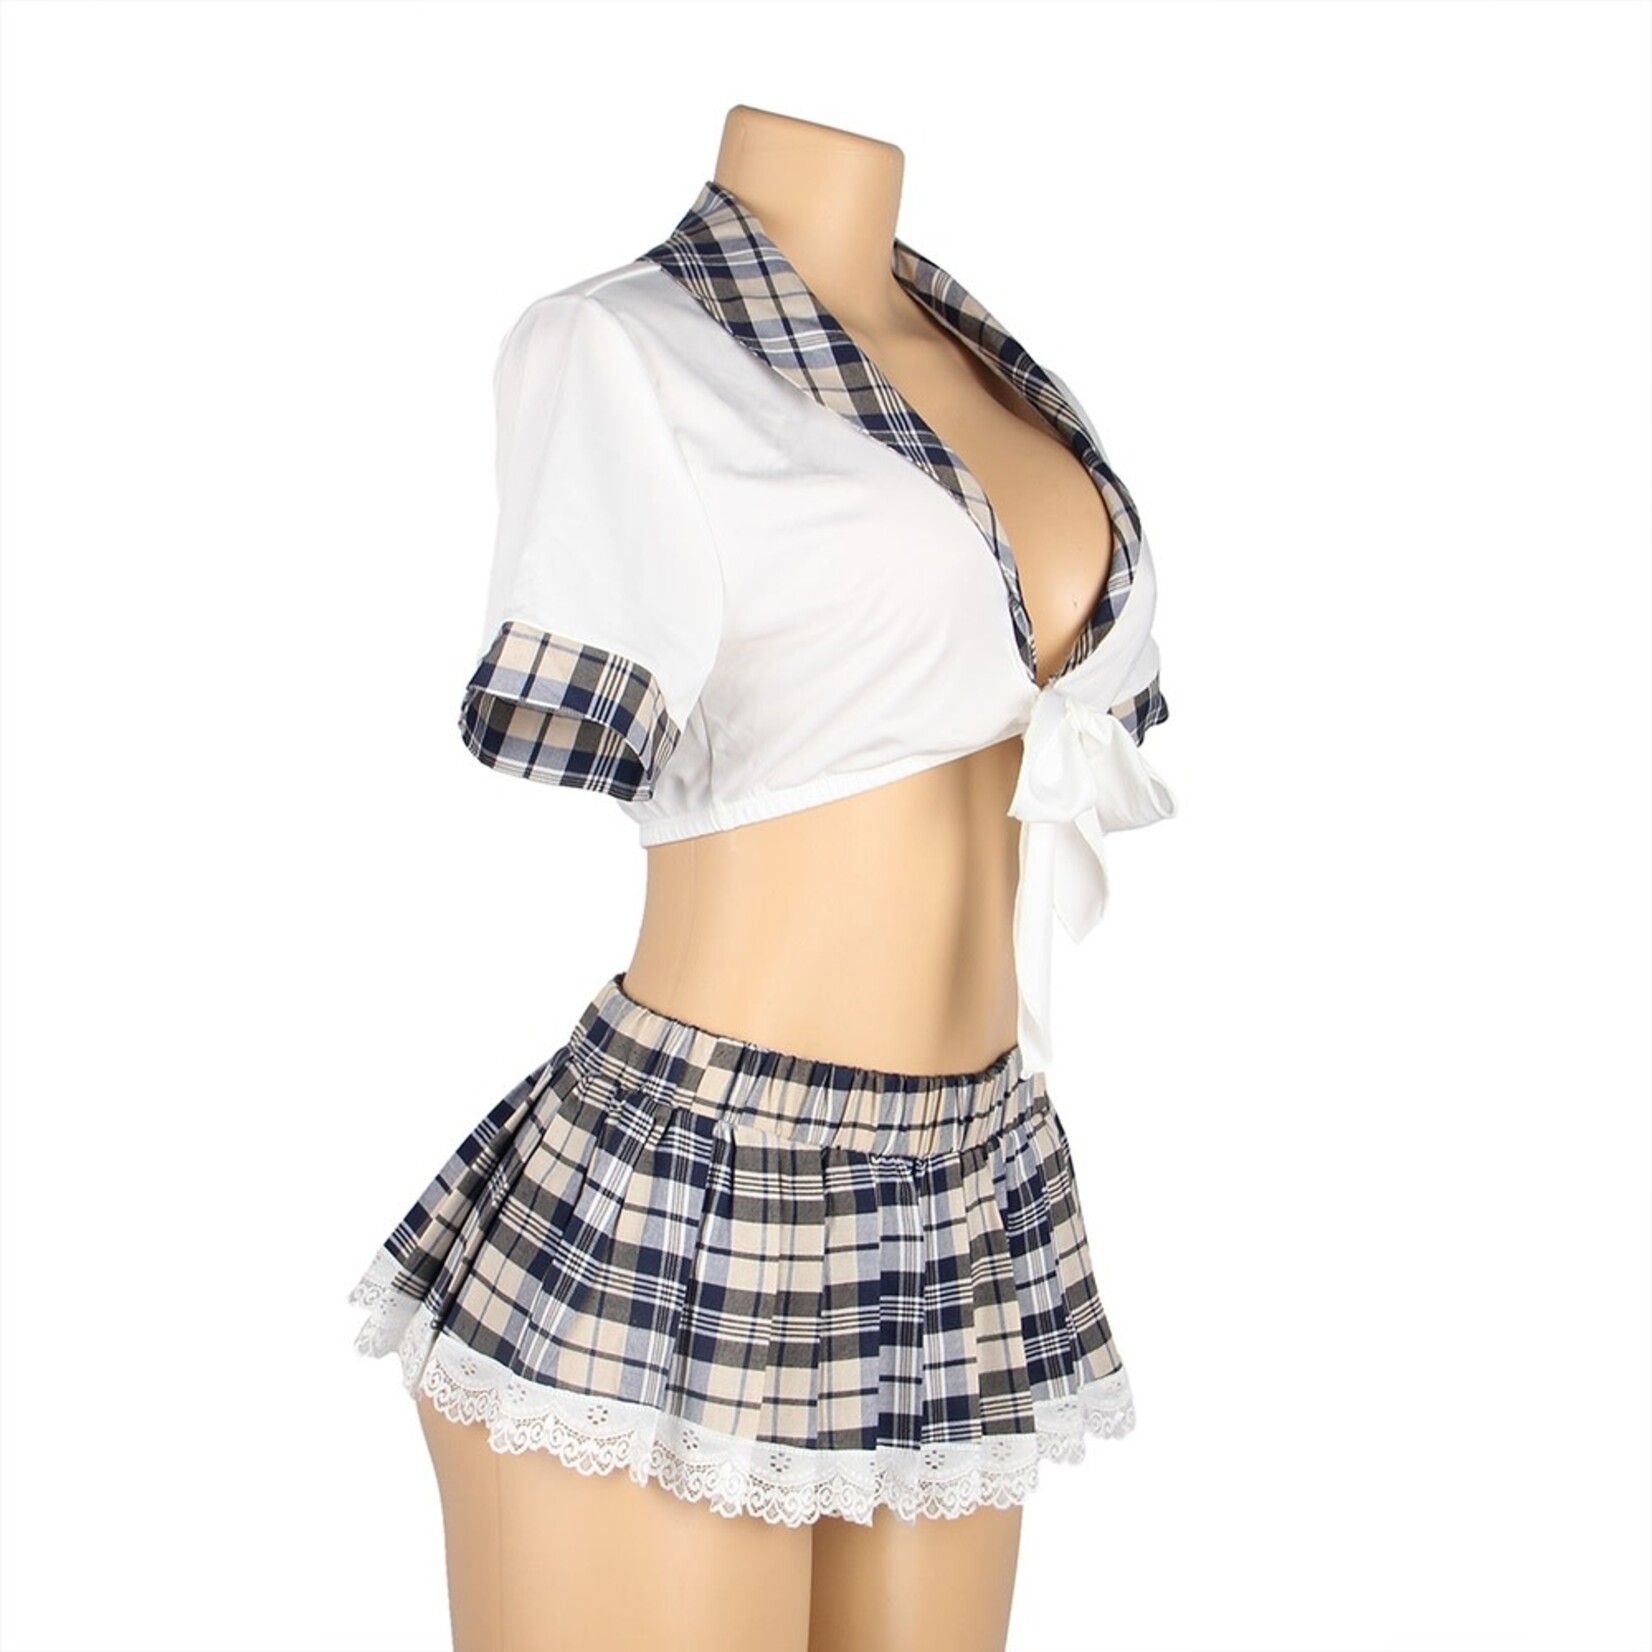 OH YEAH! -  SEXY WHITE CROP TOP PLAID SKIRT COSPLAY SUIT UNIFORM 3XL-4XL